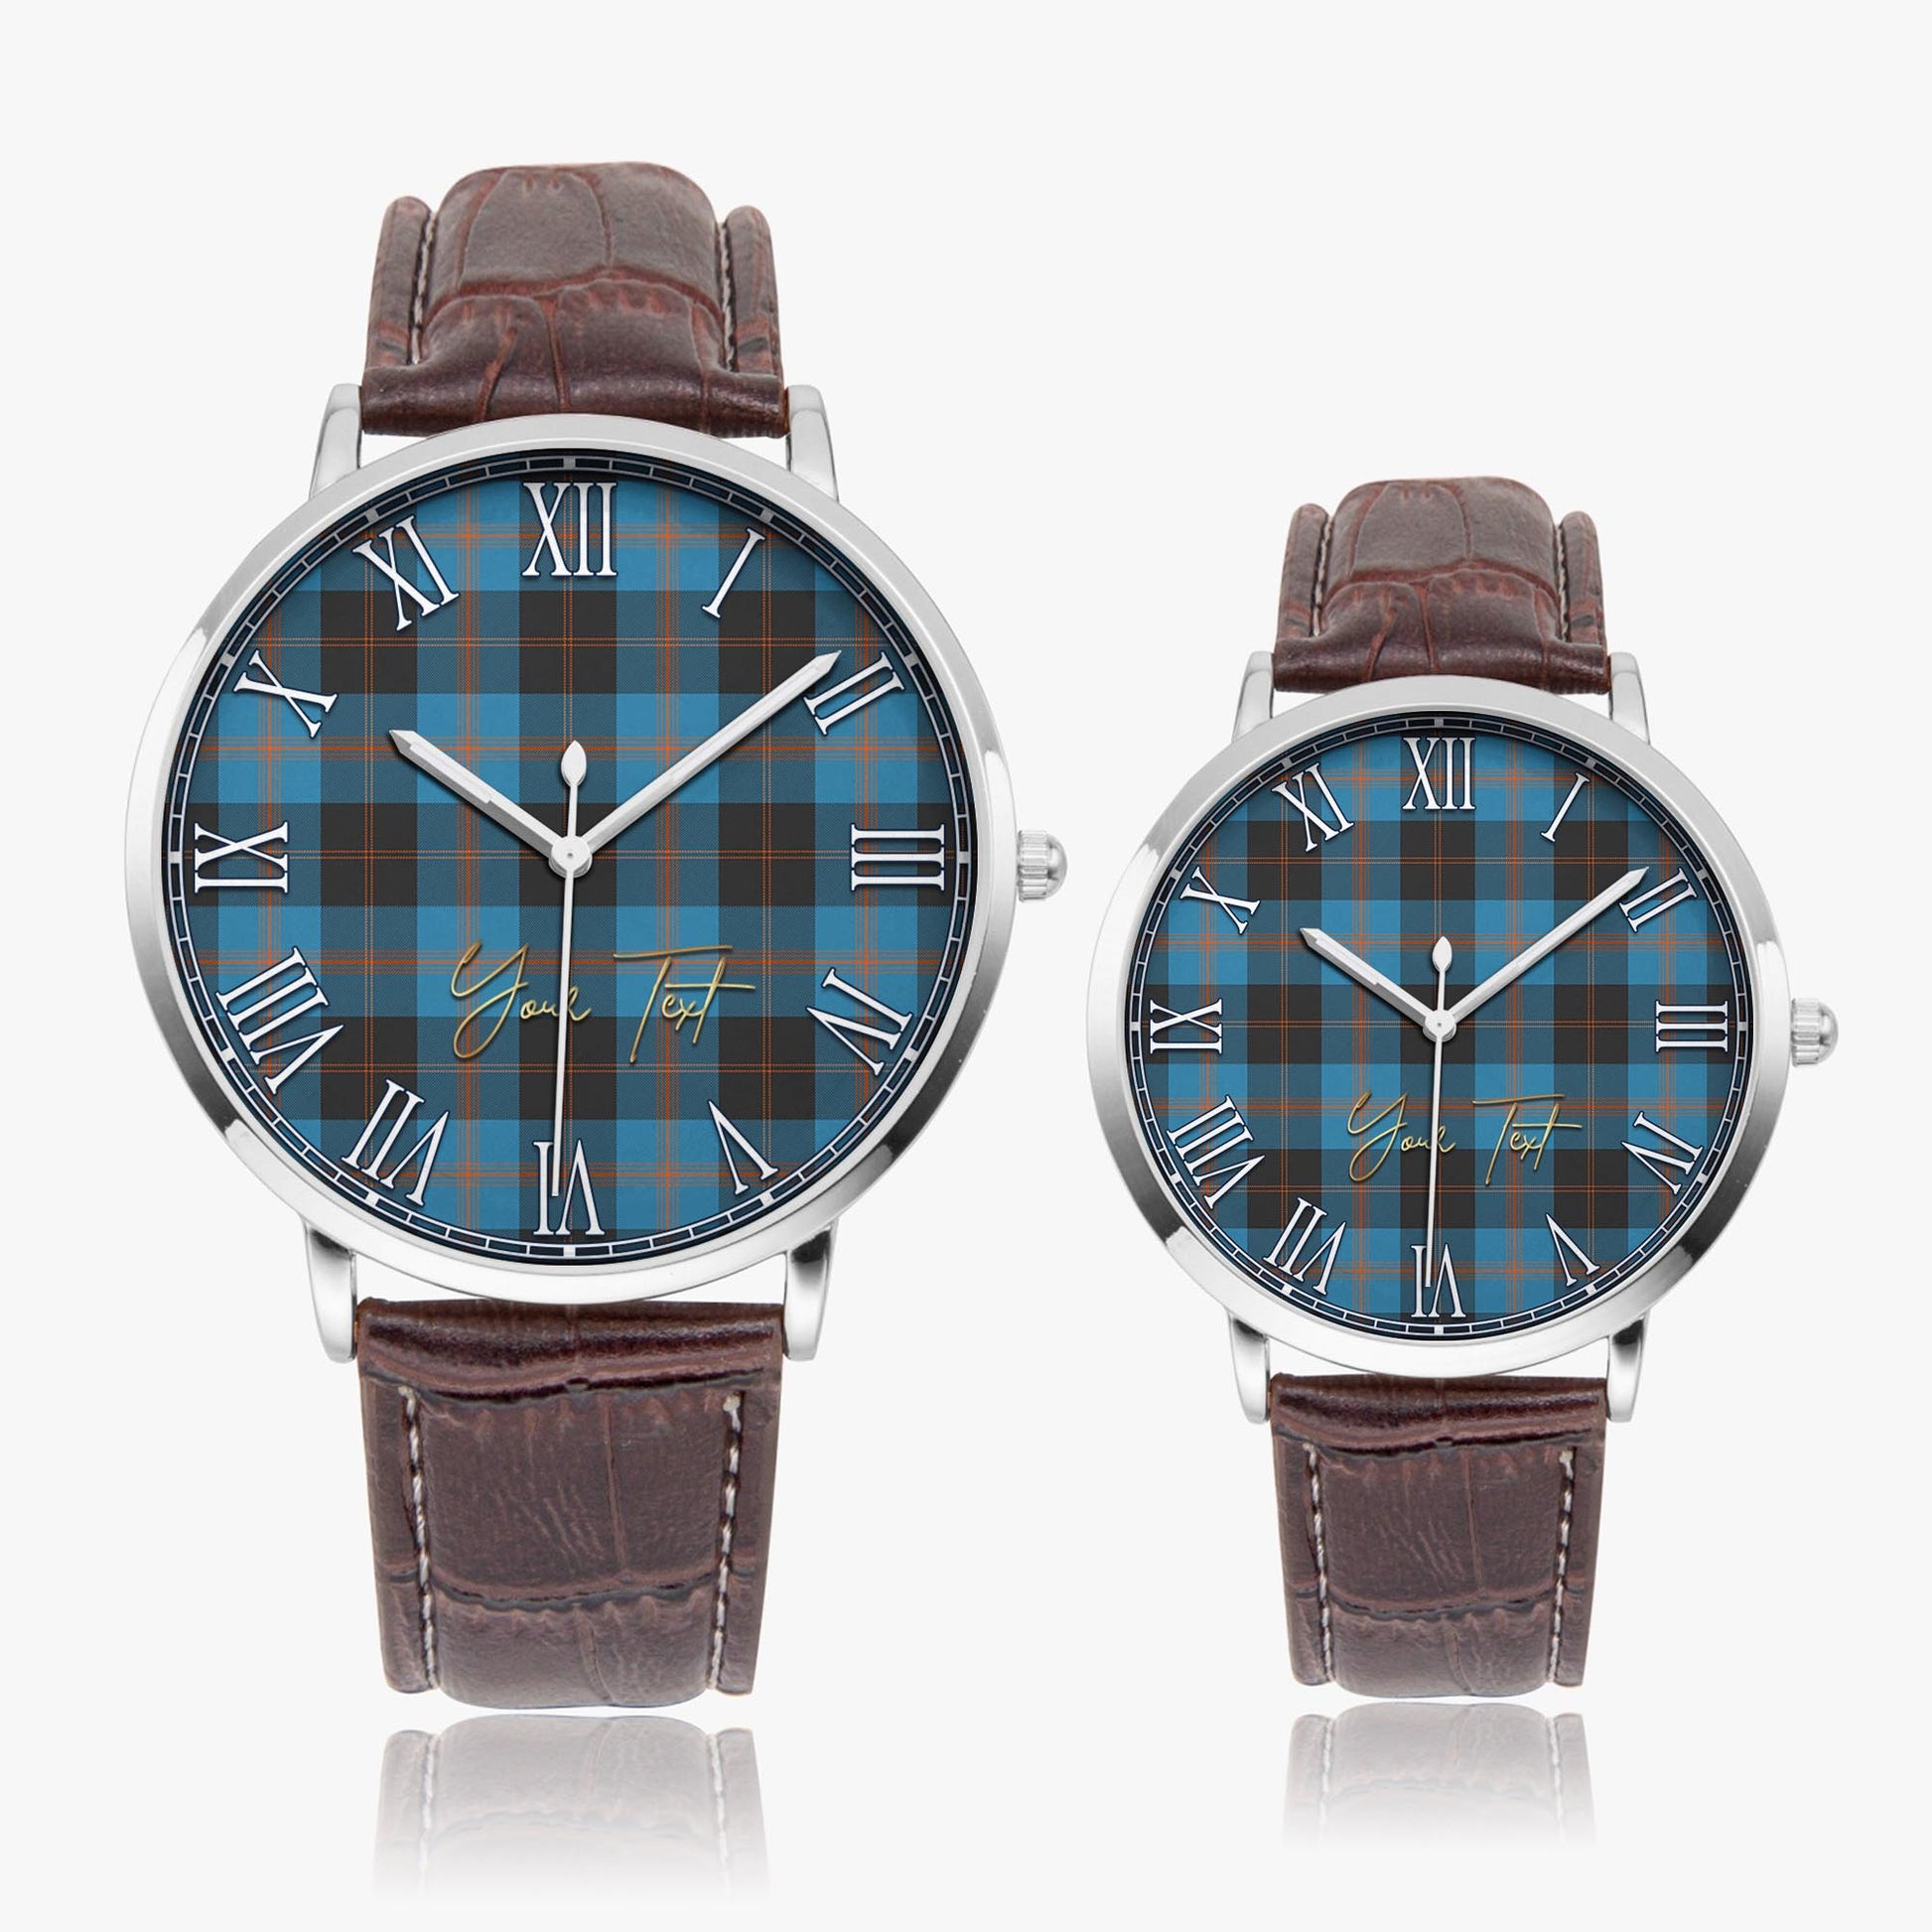 Garden Tartan Personalized Your Text Leather Trap Quartz Watch Ultra Thin Silver Case With Brown Leather Strap - Tartanvibesclothing